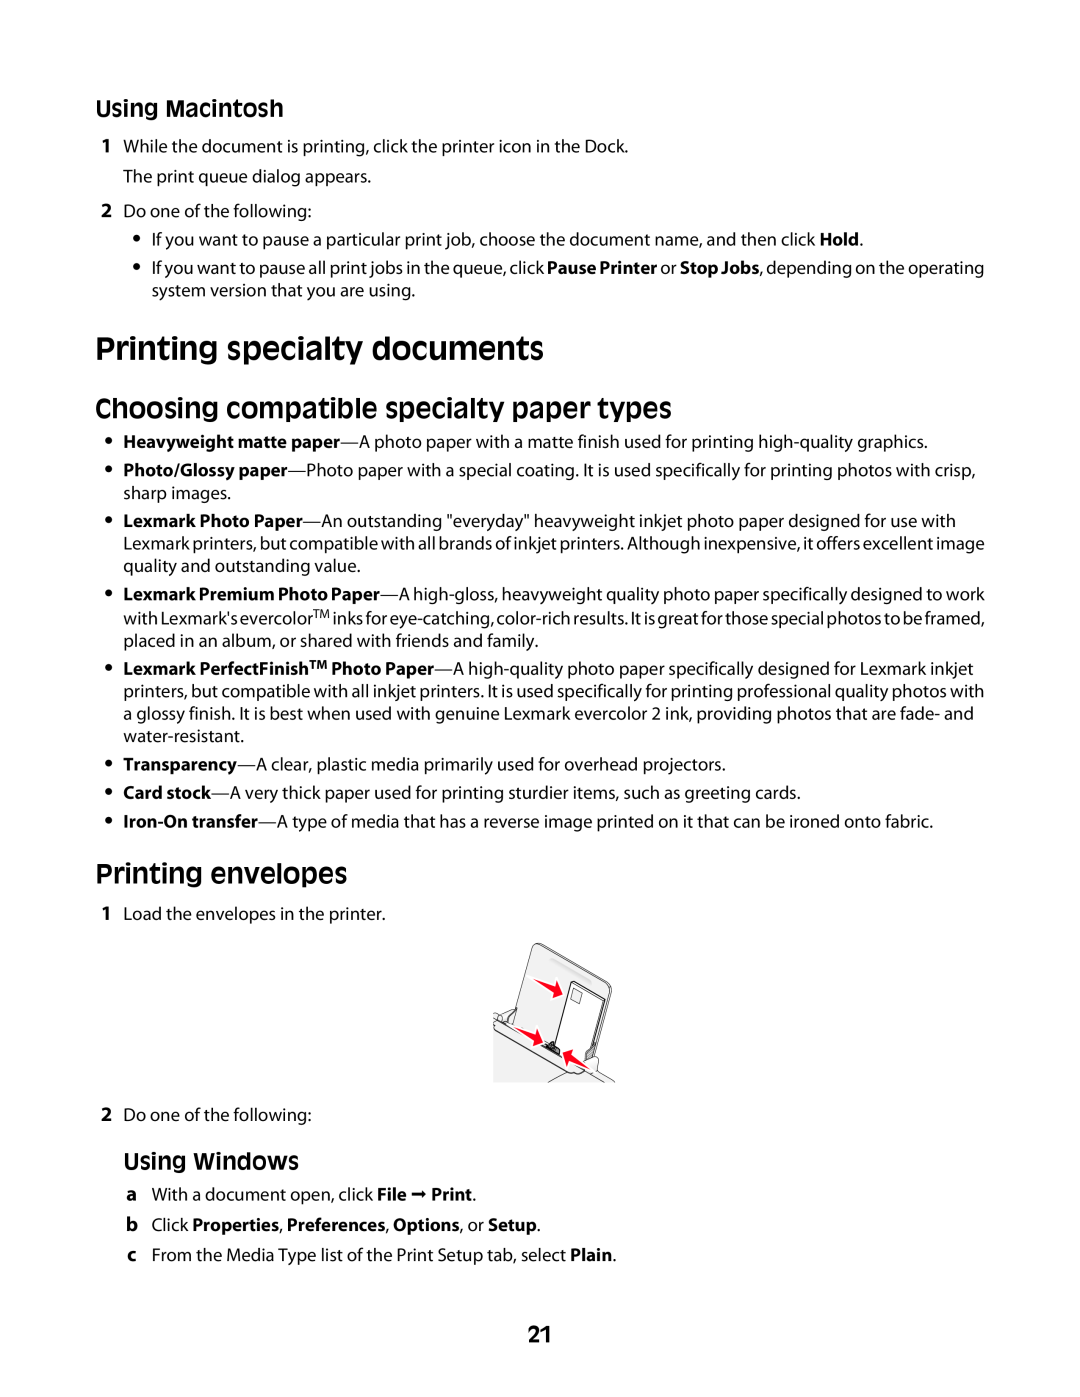 Lexmark Z2300 Printing specialty documents, Choosing compatible specialty paper types, Printing envelopes, Using Macintosh 